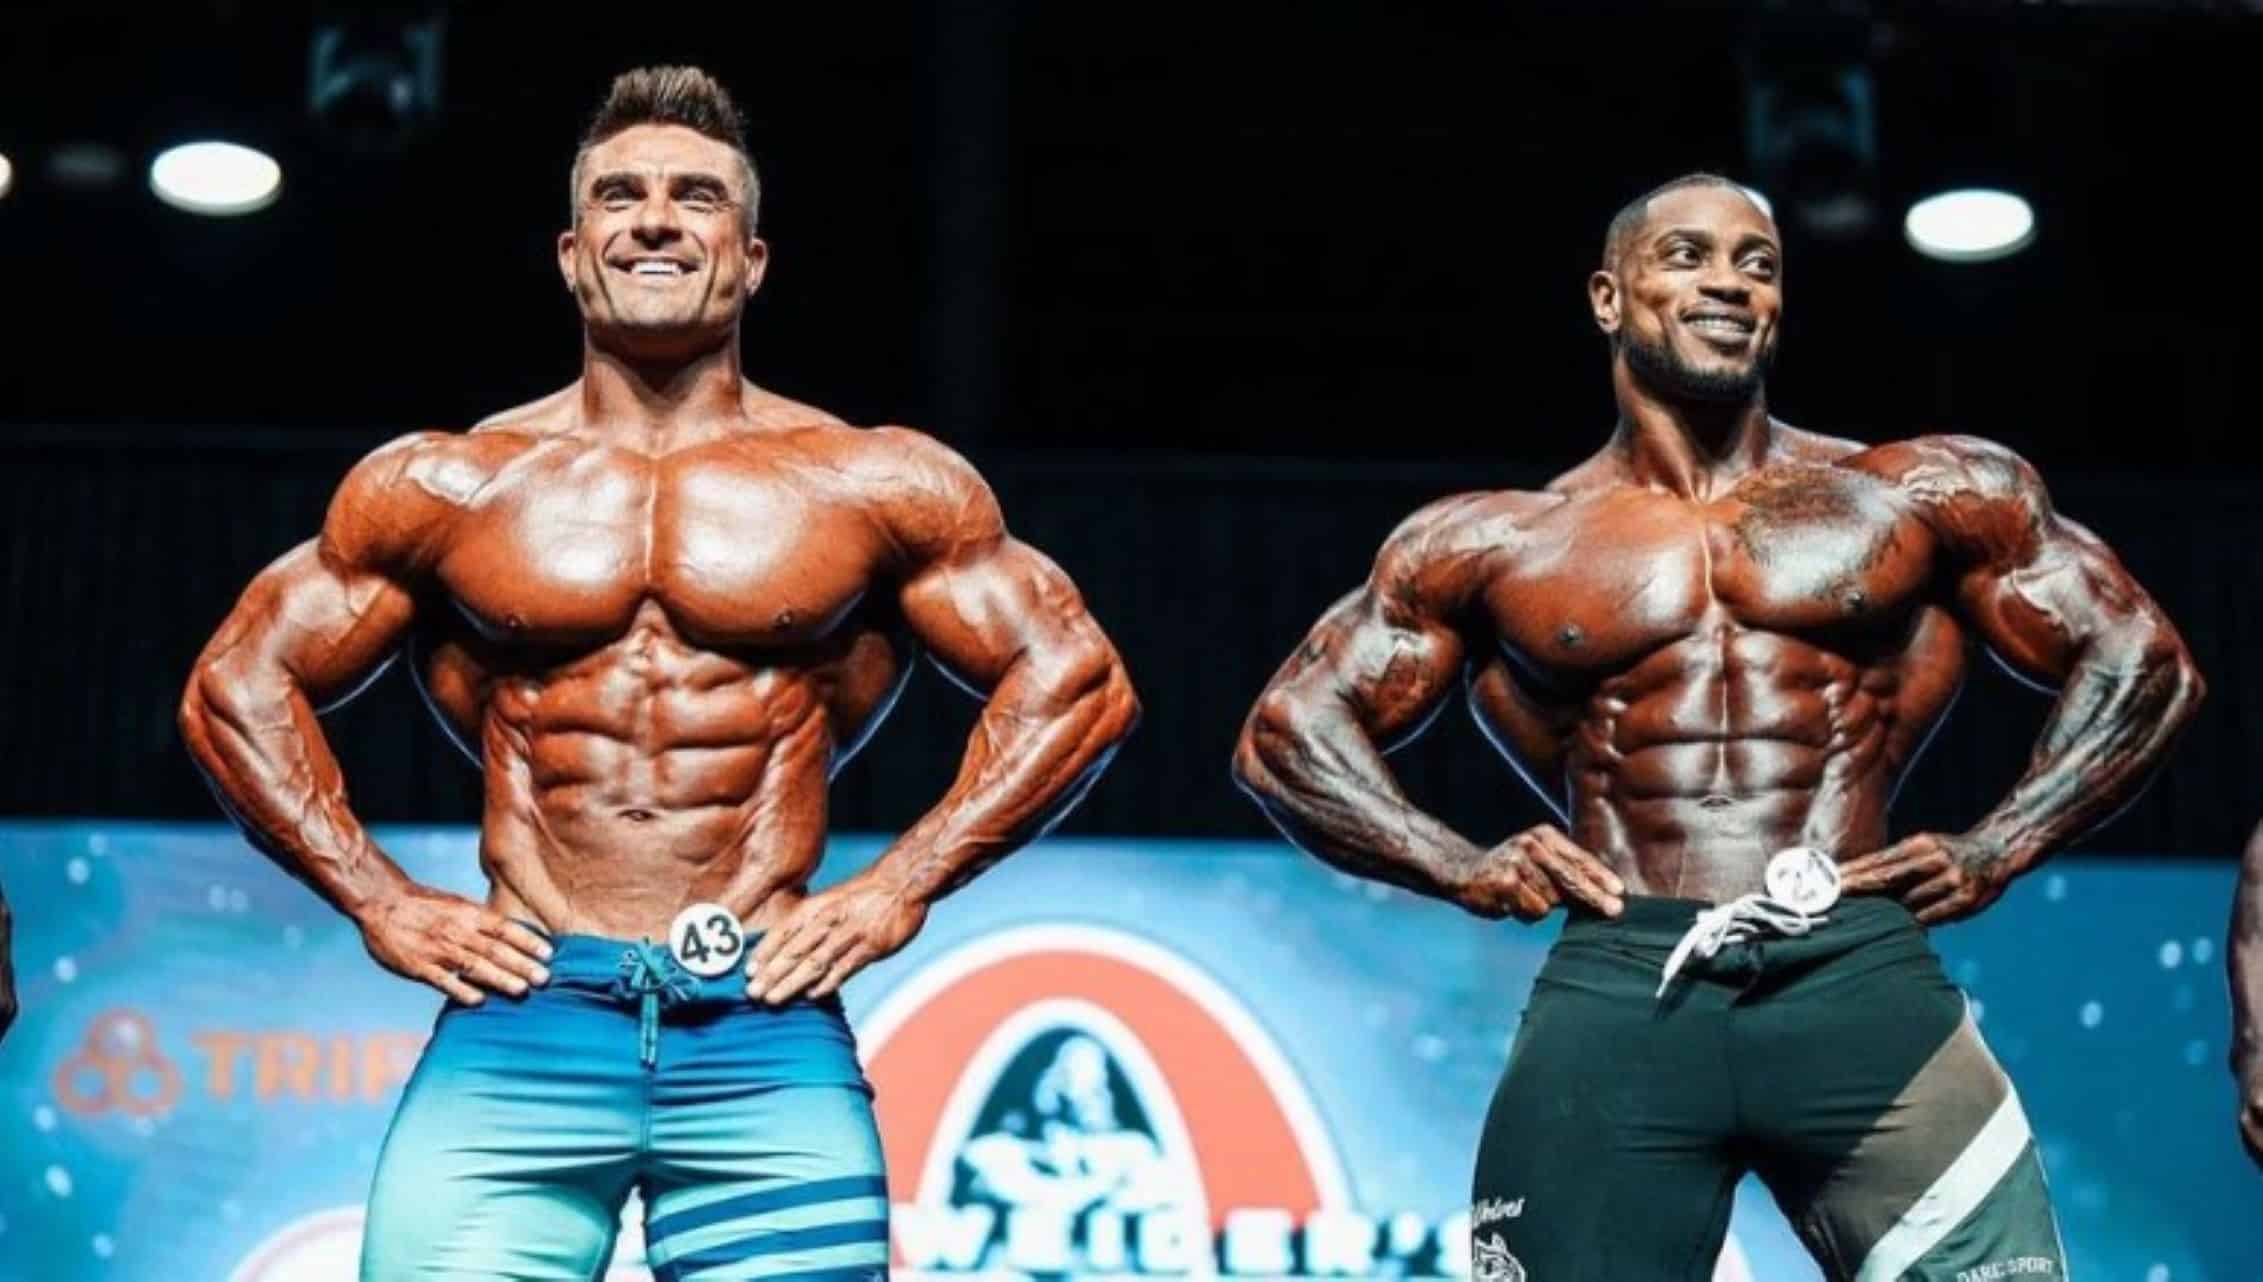 Brandon Hendrickson's Dramatic Play-By-Play Of Olympia 2020 Men's Physique